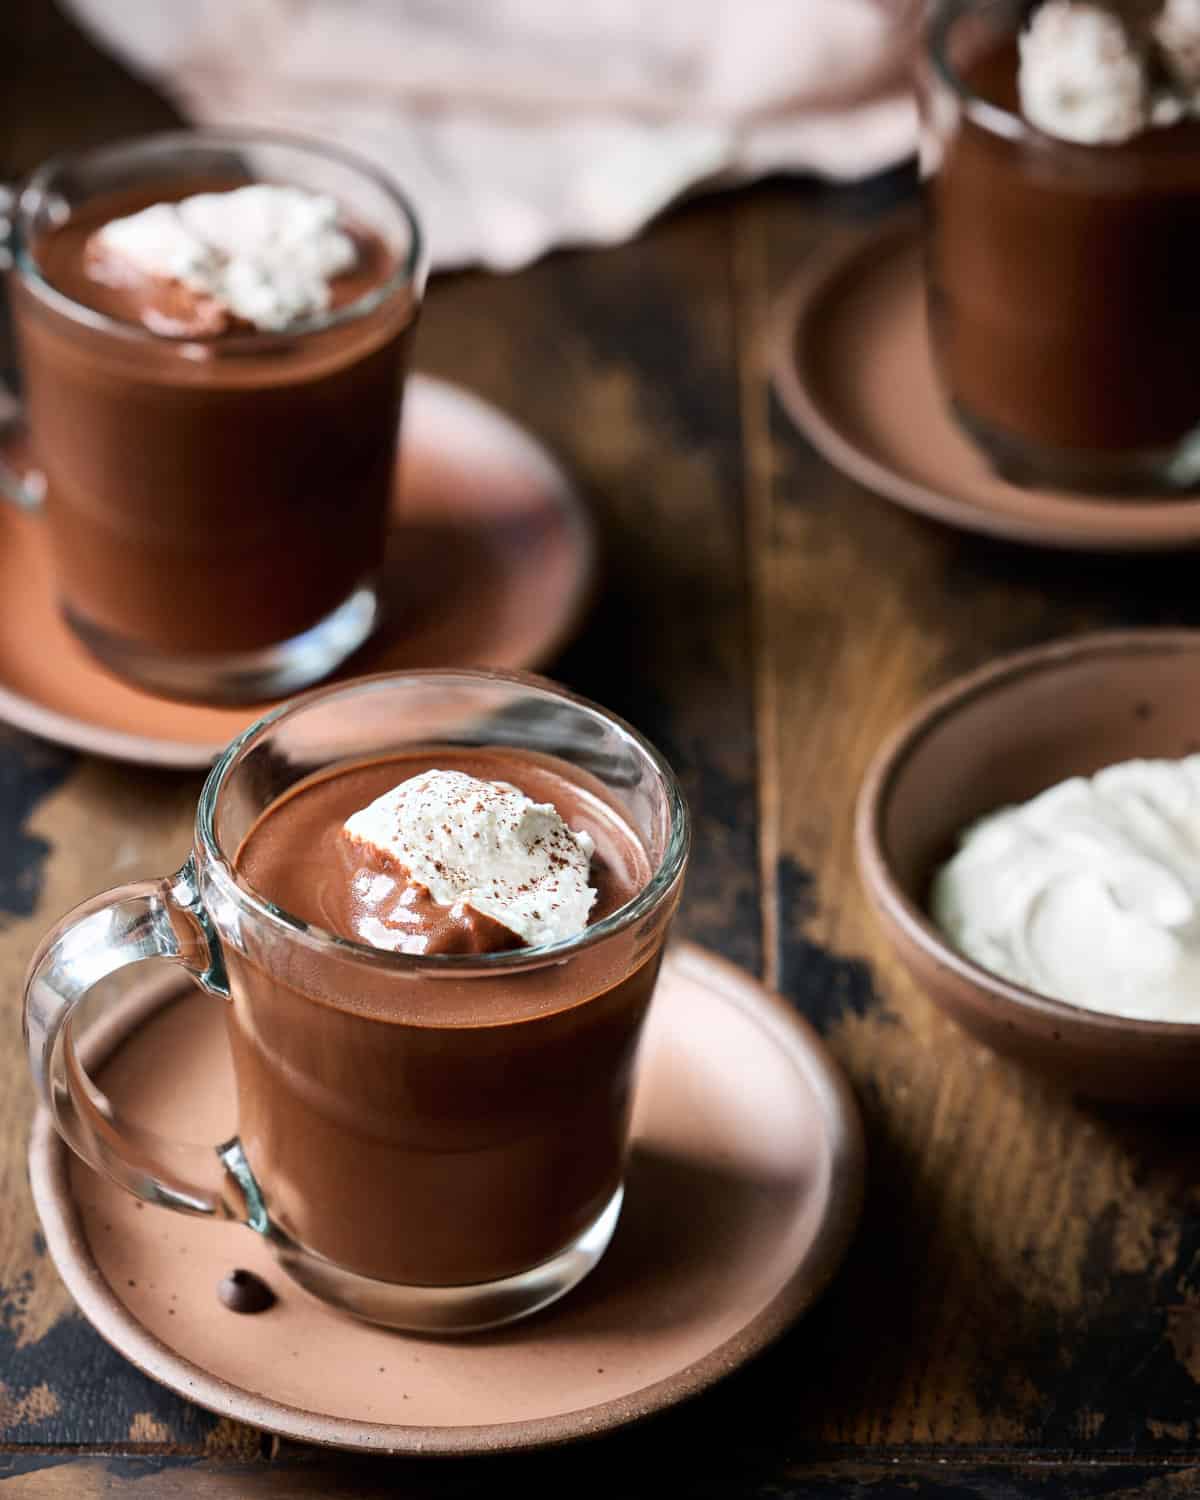 Three glass mugs filled with hot chocolate and whipped cream on plates on a wood table.